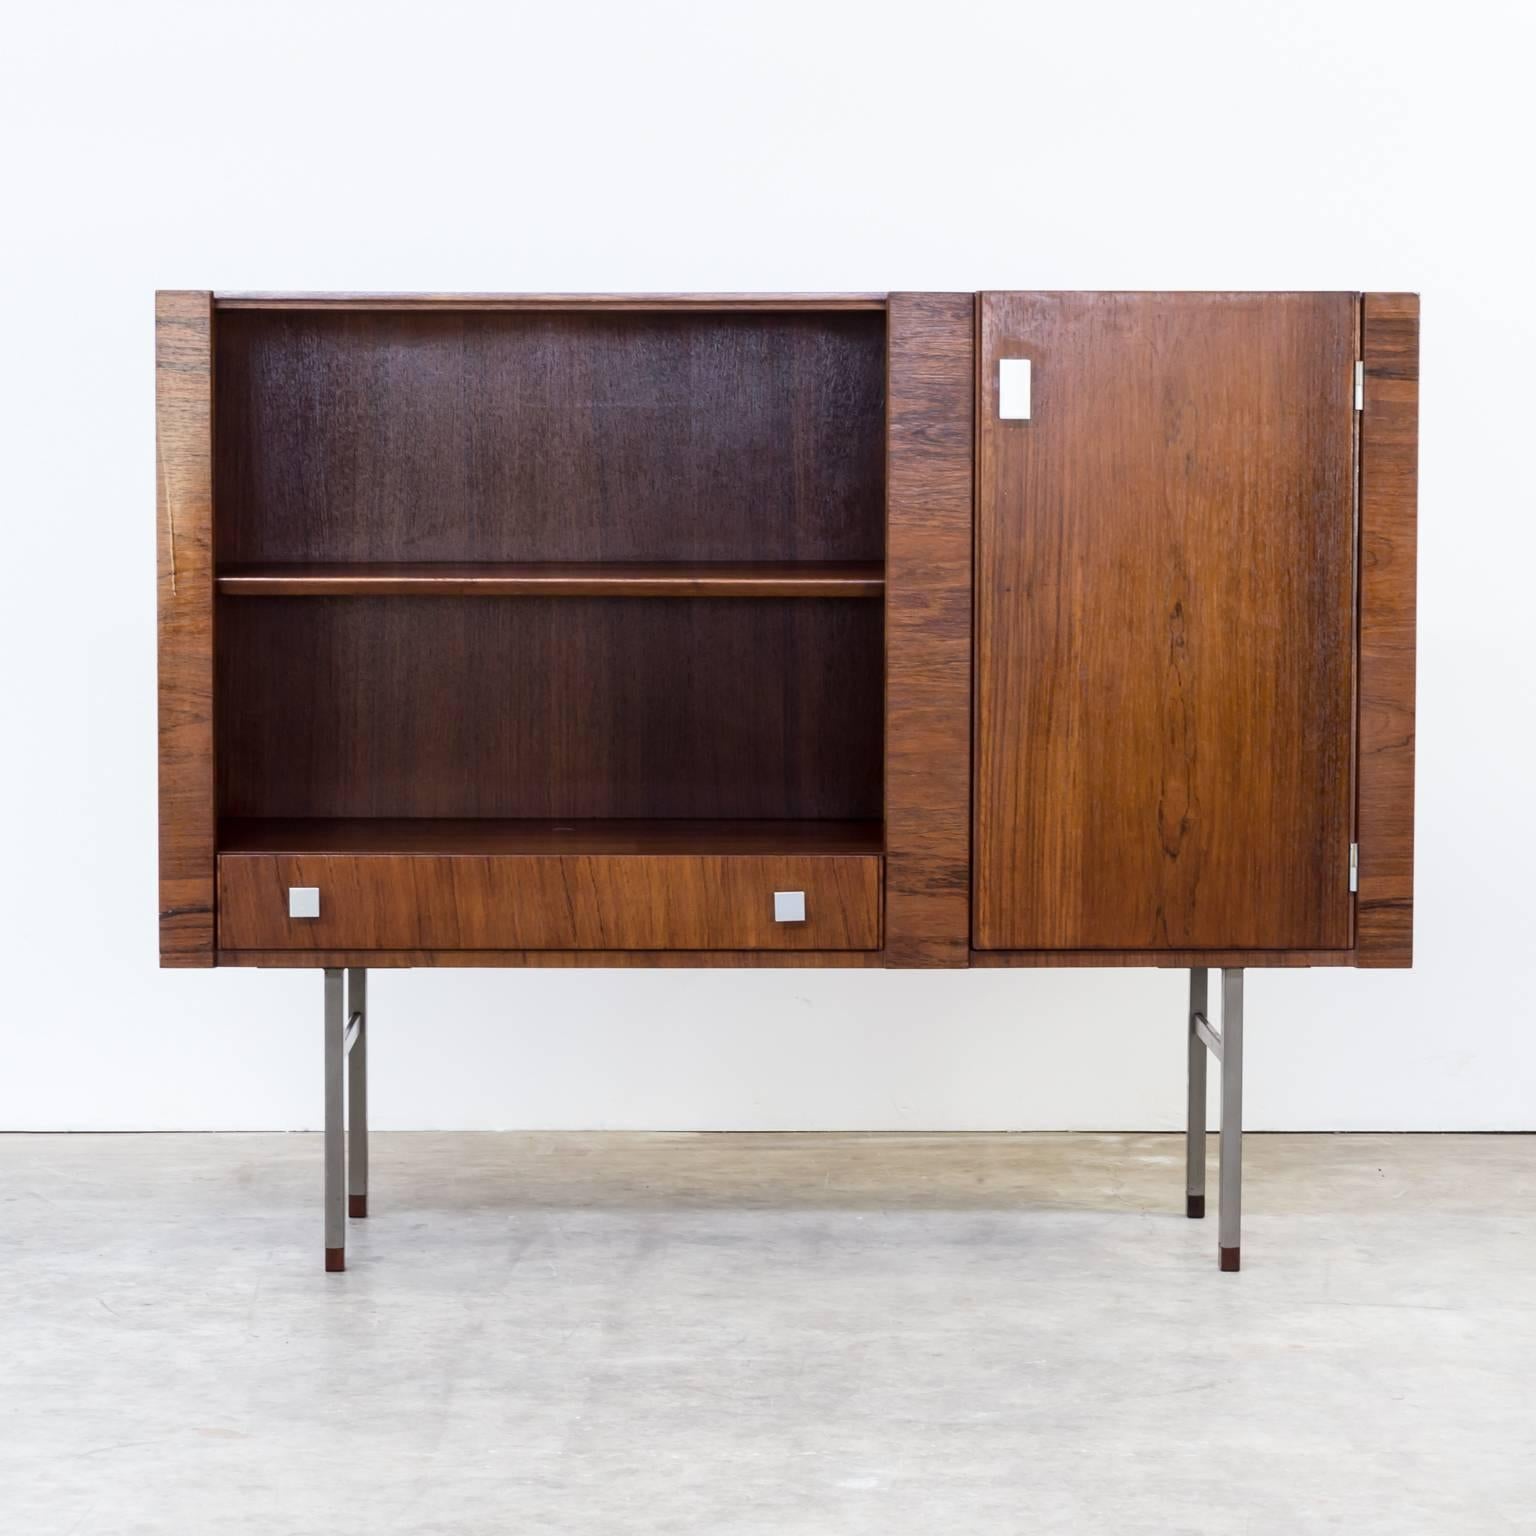 1960s Alfred Hendrickx rosewood cabinet by Belform Belgium. Nice rosewood good shaped cabinet. Good condition wear consistent with age and use.